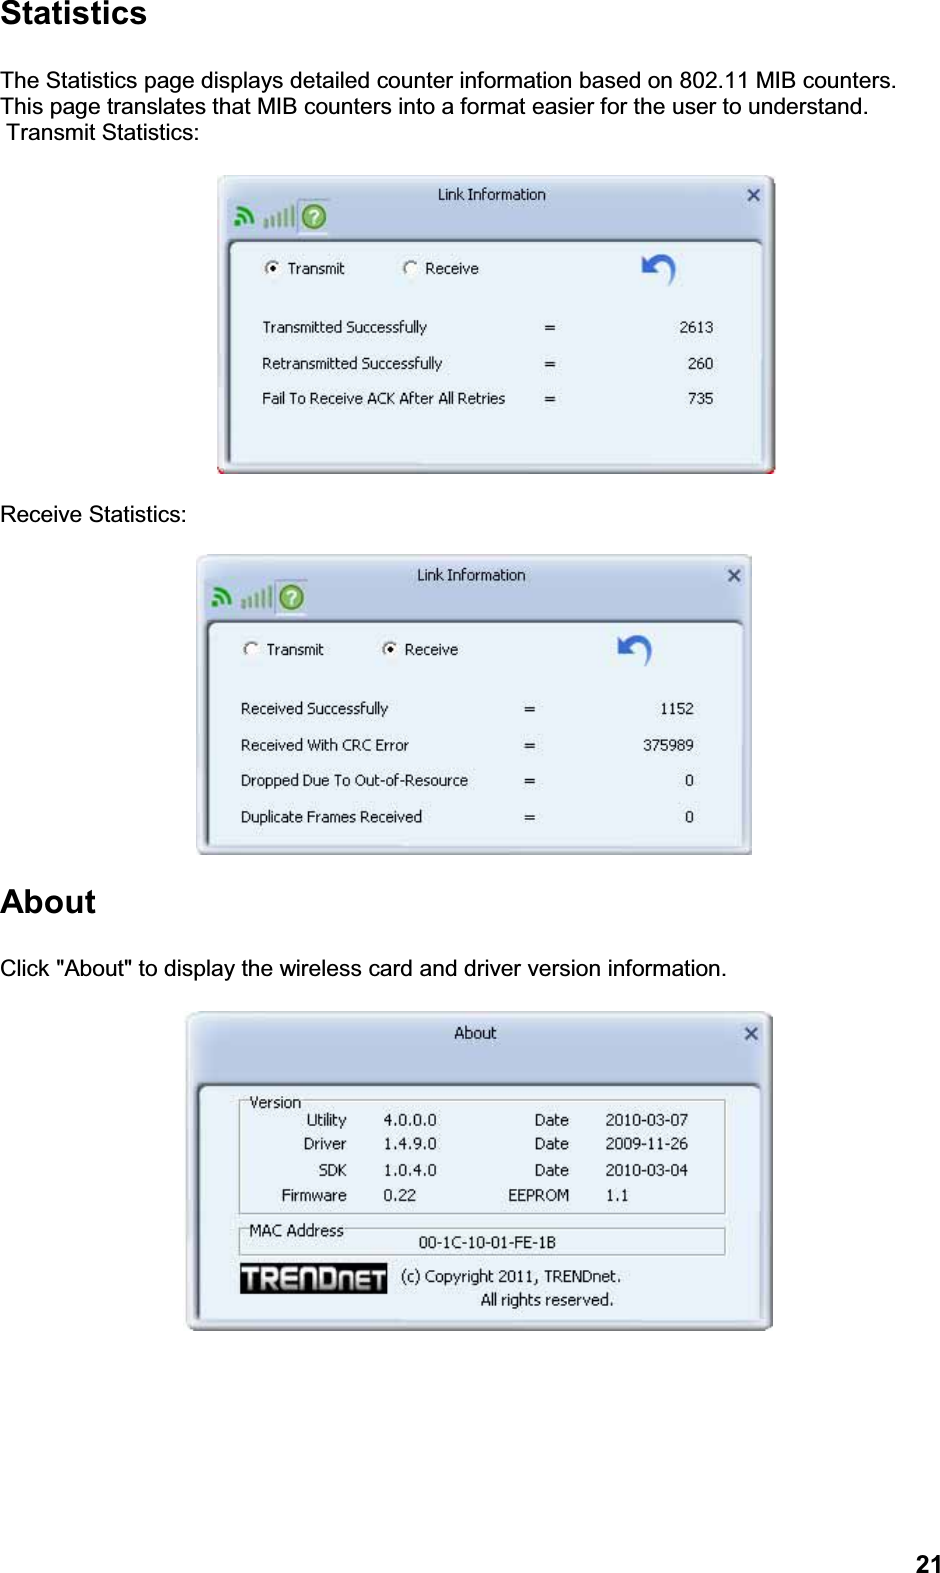 21StatisticsThe Statistics page displays detailed counter information based on 802.11 MIB counters. This page translates that MIB counters into a format easier for the user to understand. Transmit Statistics:       Receive Statistics:AboutClick &quot;About&quot; to display the wireless card and driver version information.